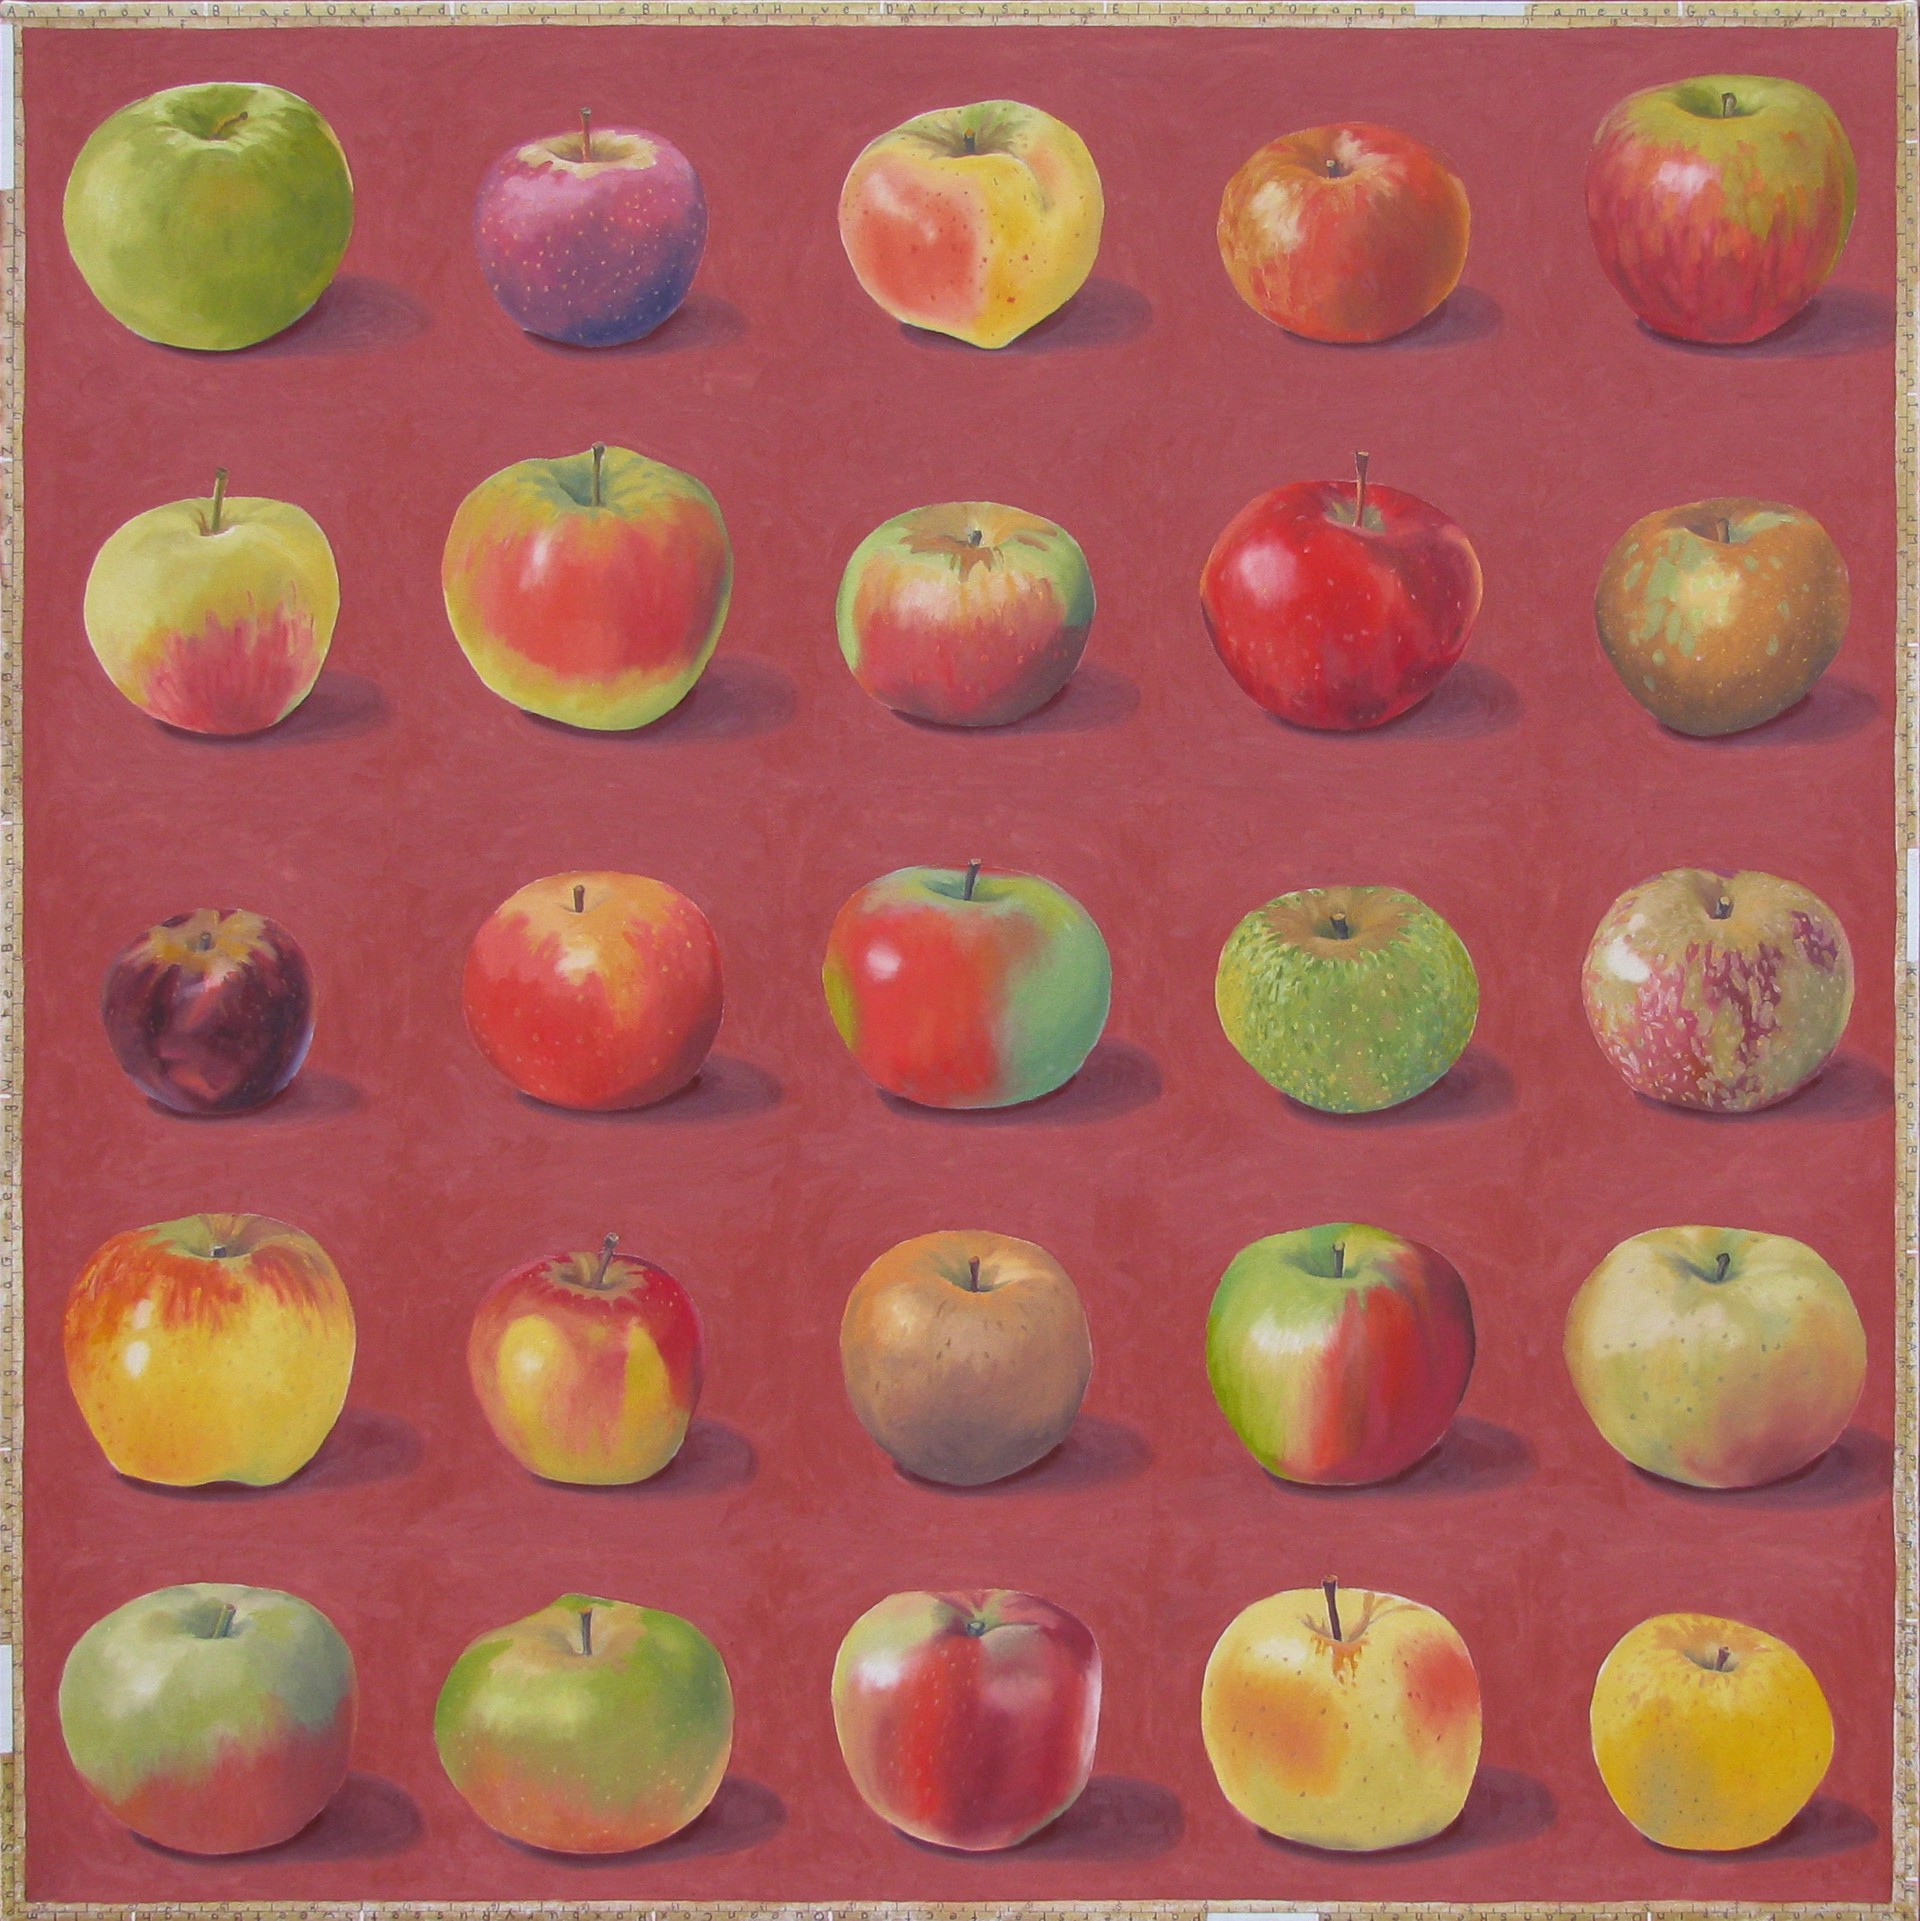 Apples A to Z by Tom Shelton